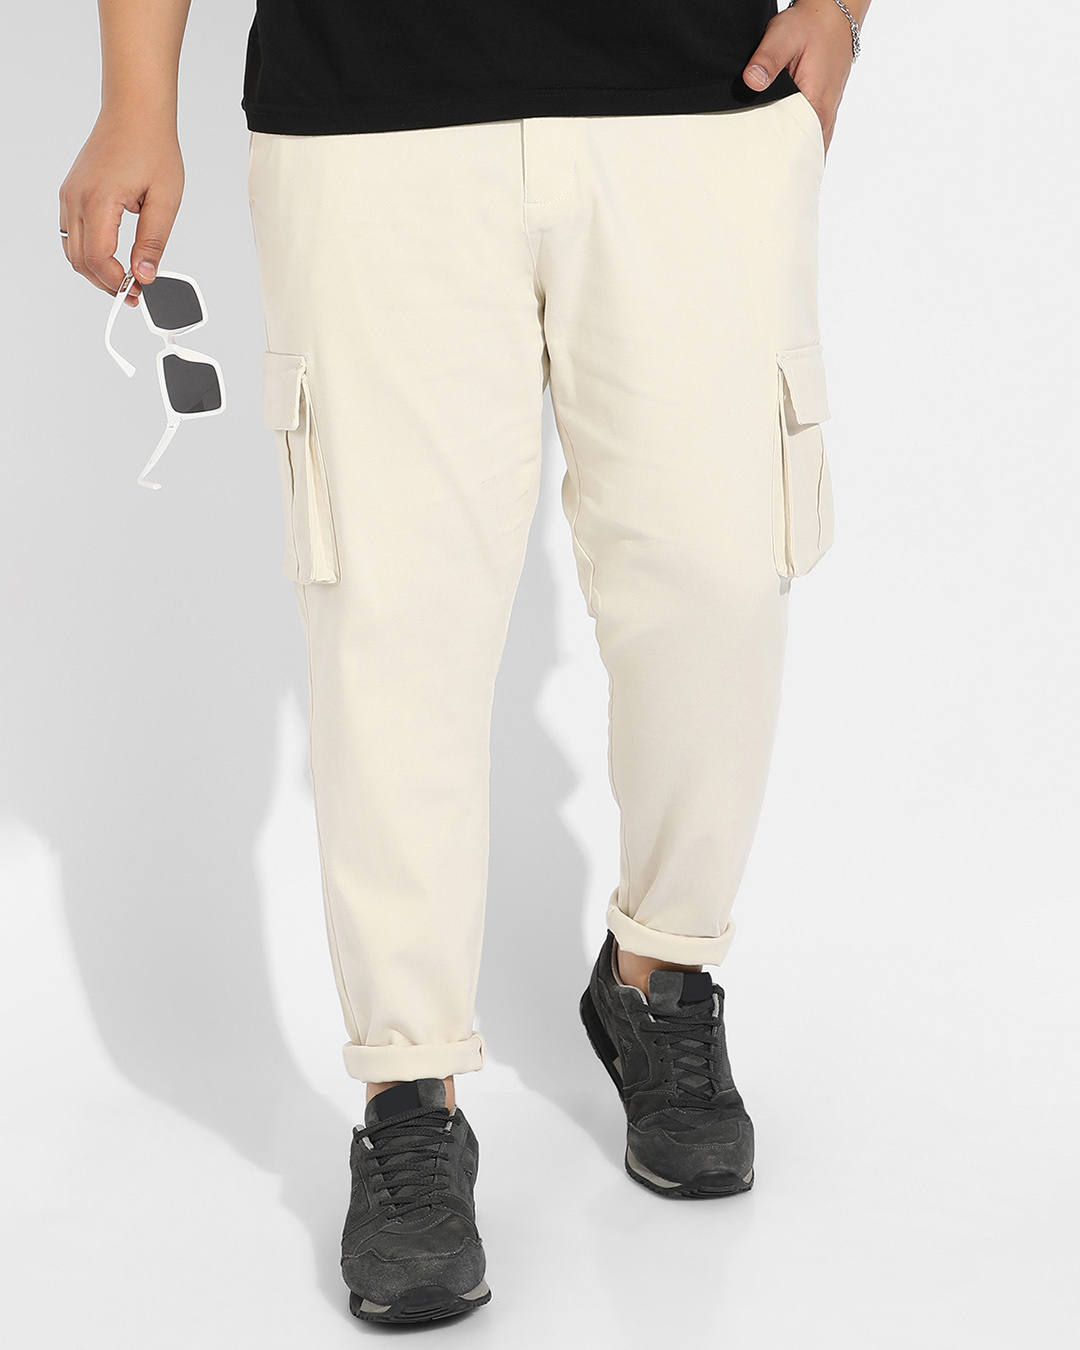 fcity.in - Revago Cargo Trousers Elastic Waist With Flap Pockets Lightweight